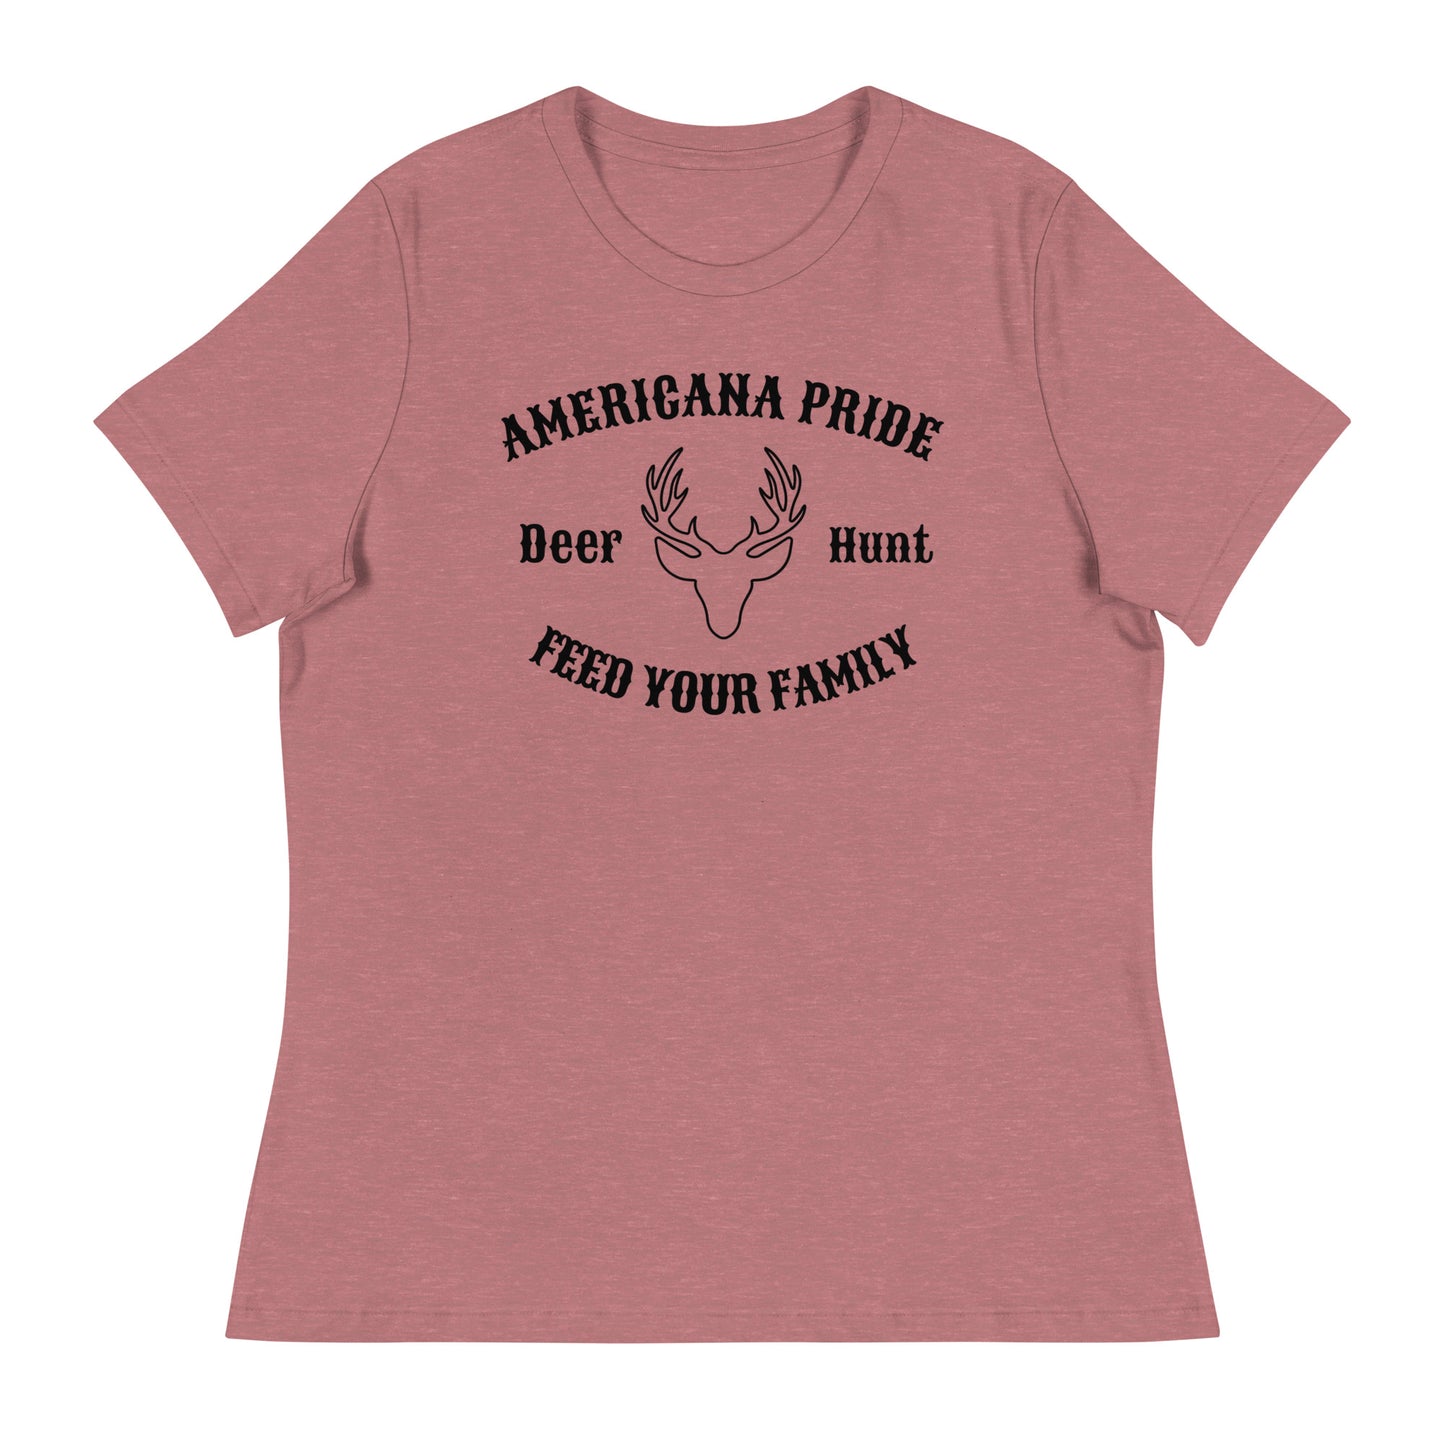 Americana Pride Deer Hunt Feed your family womens T-Shirt